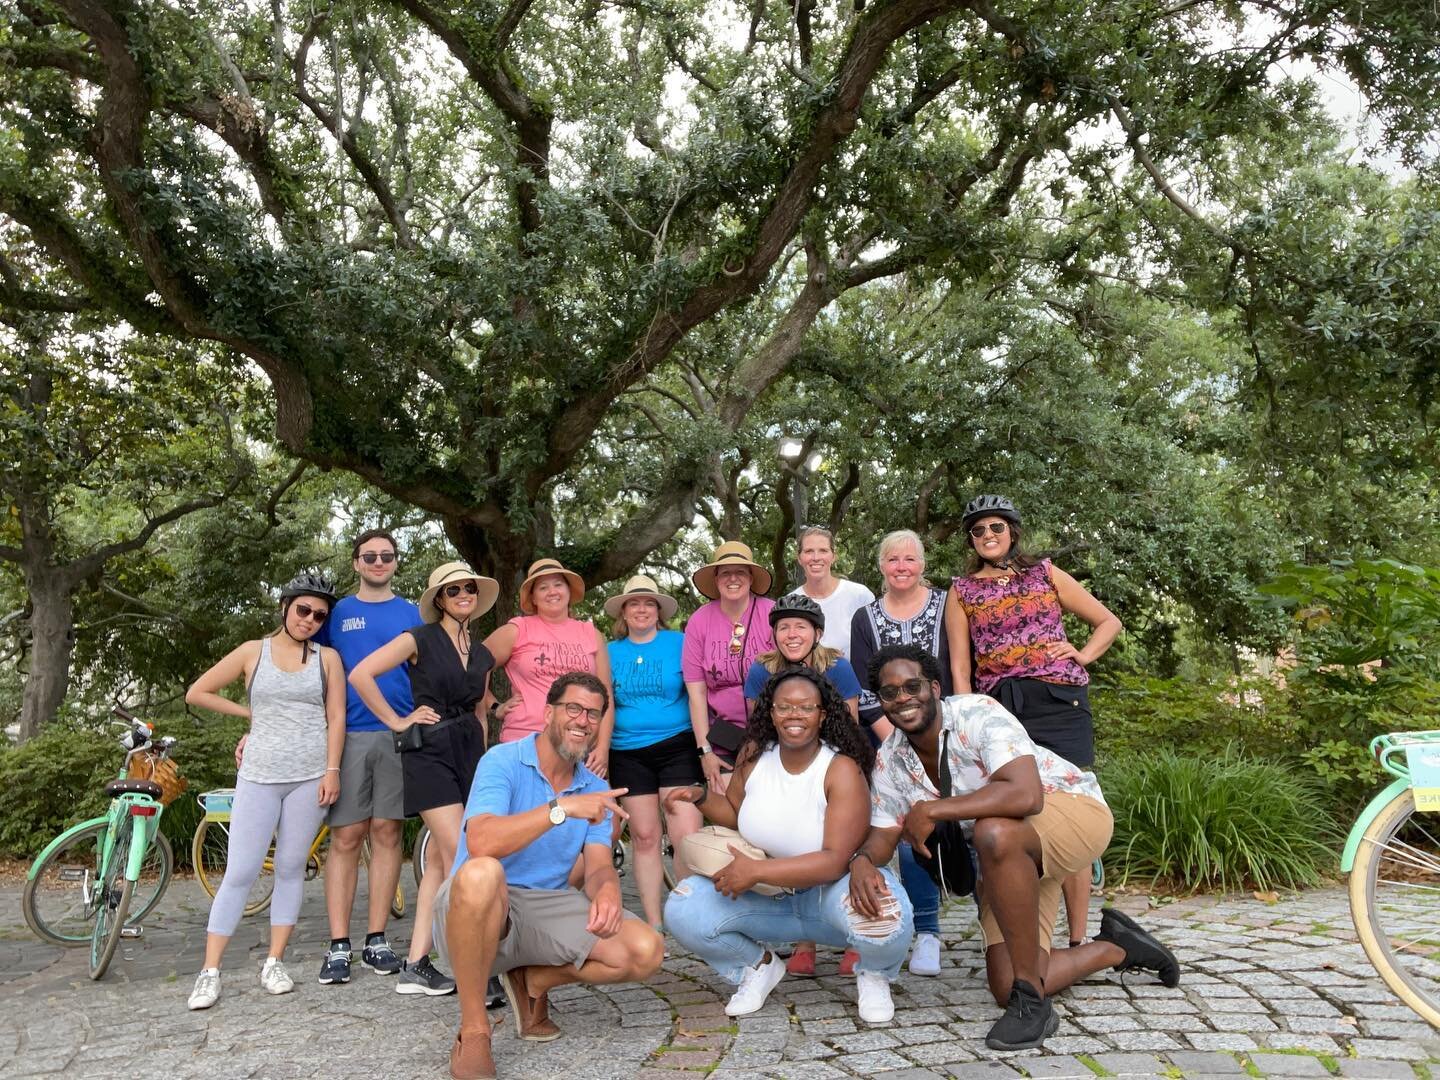 Great afternoon cycling around town with a great group of people. Thanks for the picture set up @mswestlake !!! #creoleodysseybicycletour #onetimeinnola #nola #neworleans #datbikelife #neworleansbiketours #bicycle #publicbikes #visitneworleans #louis